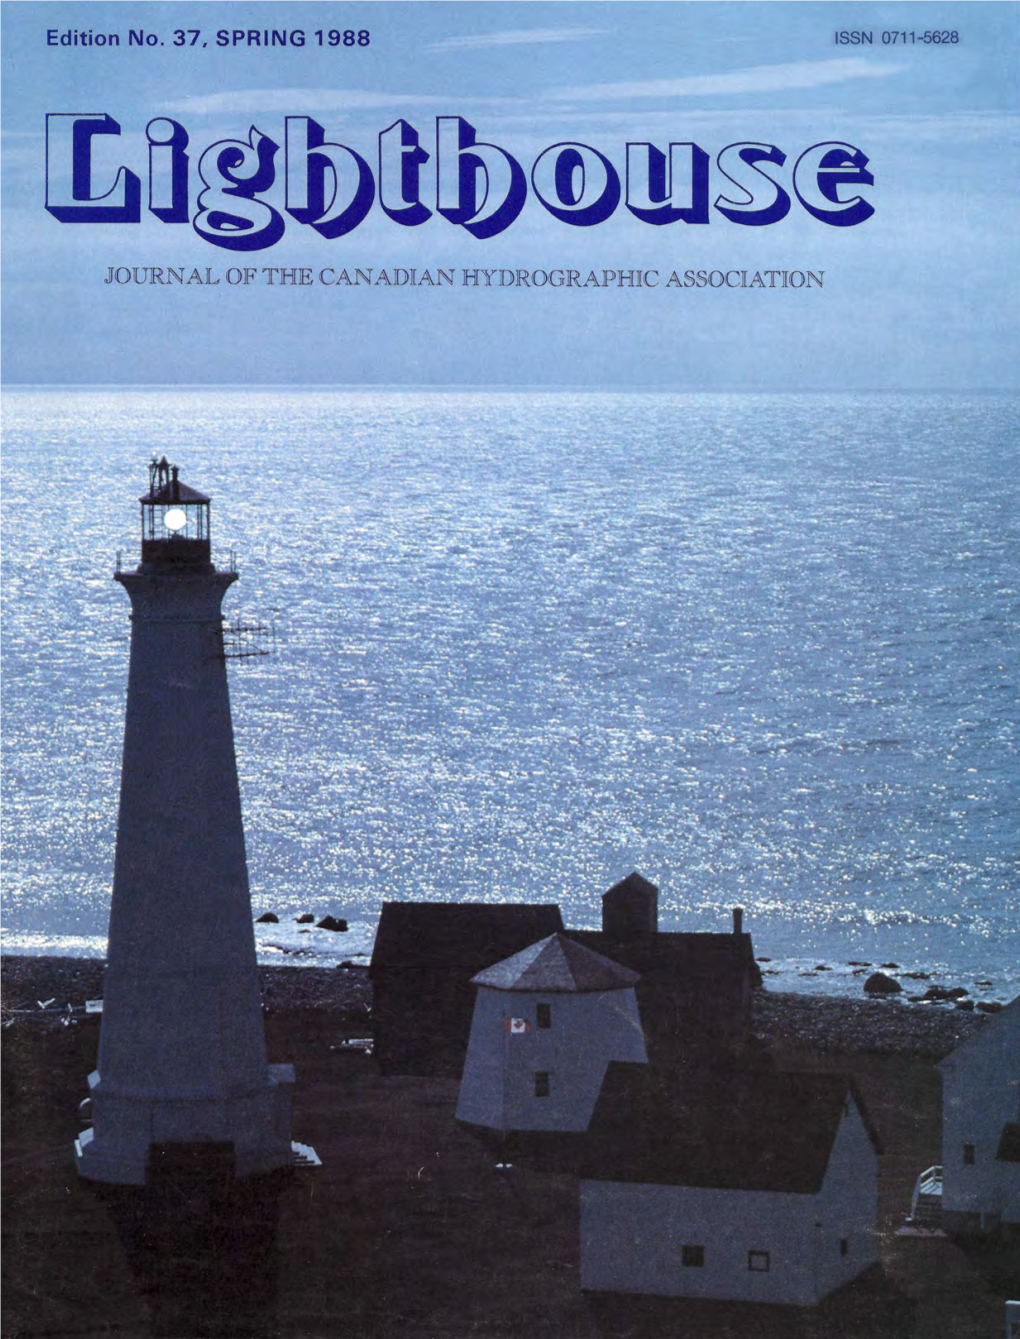 Lighthouse: Edition 37 Spring 1988 Page 1 Year 0 1 K 1 M 2 , N 2 K 2 M 4 to Illustrate the Procedure the Height of the Tide at Saint John, N.B